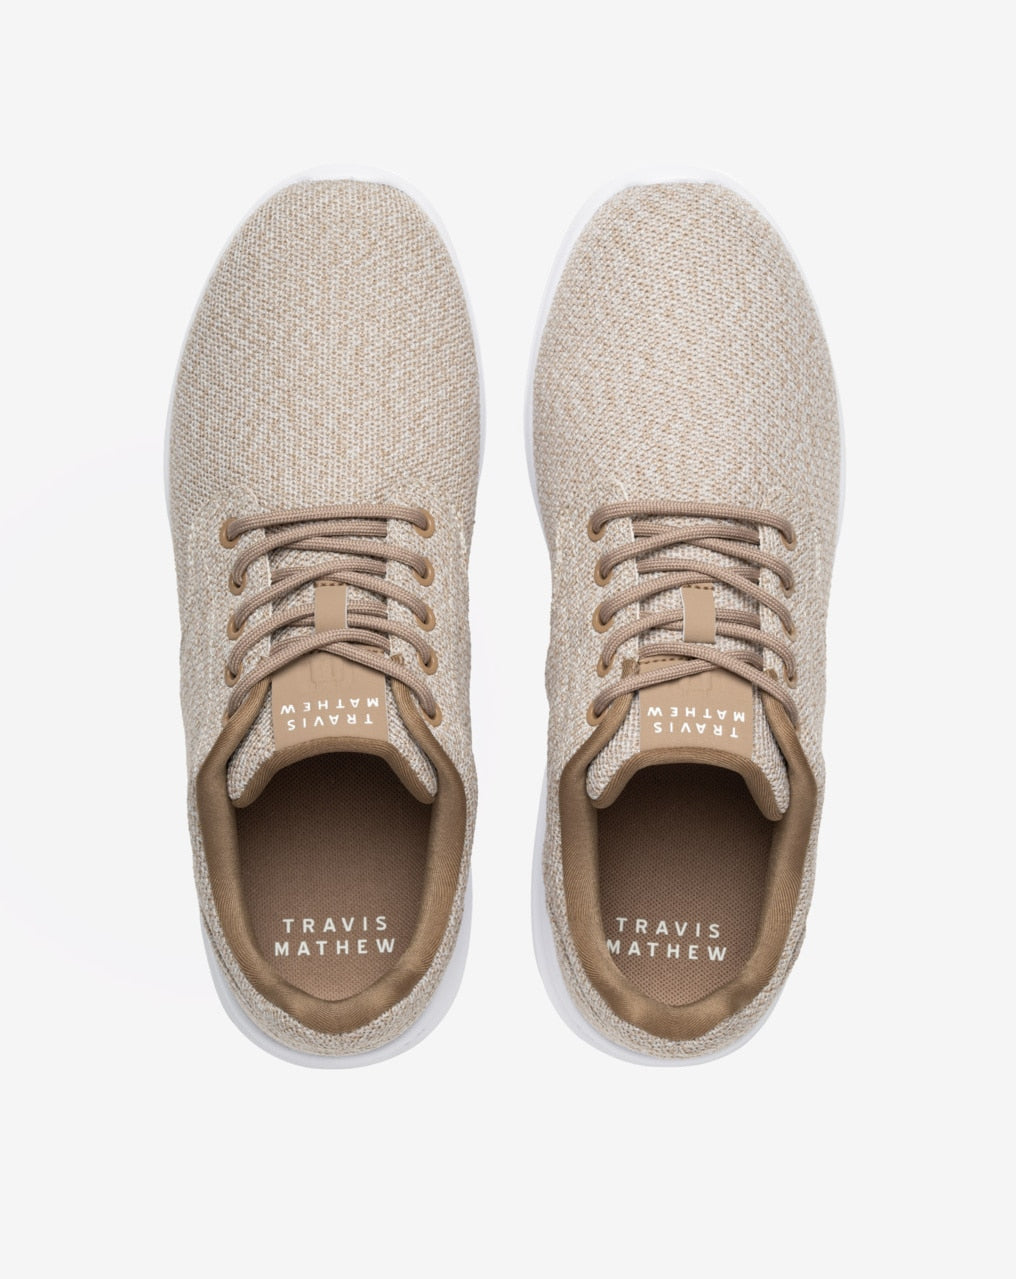 Travis Mathew The Daily Knit 2 Knit Lace Up Sneaker in Natural